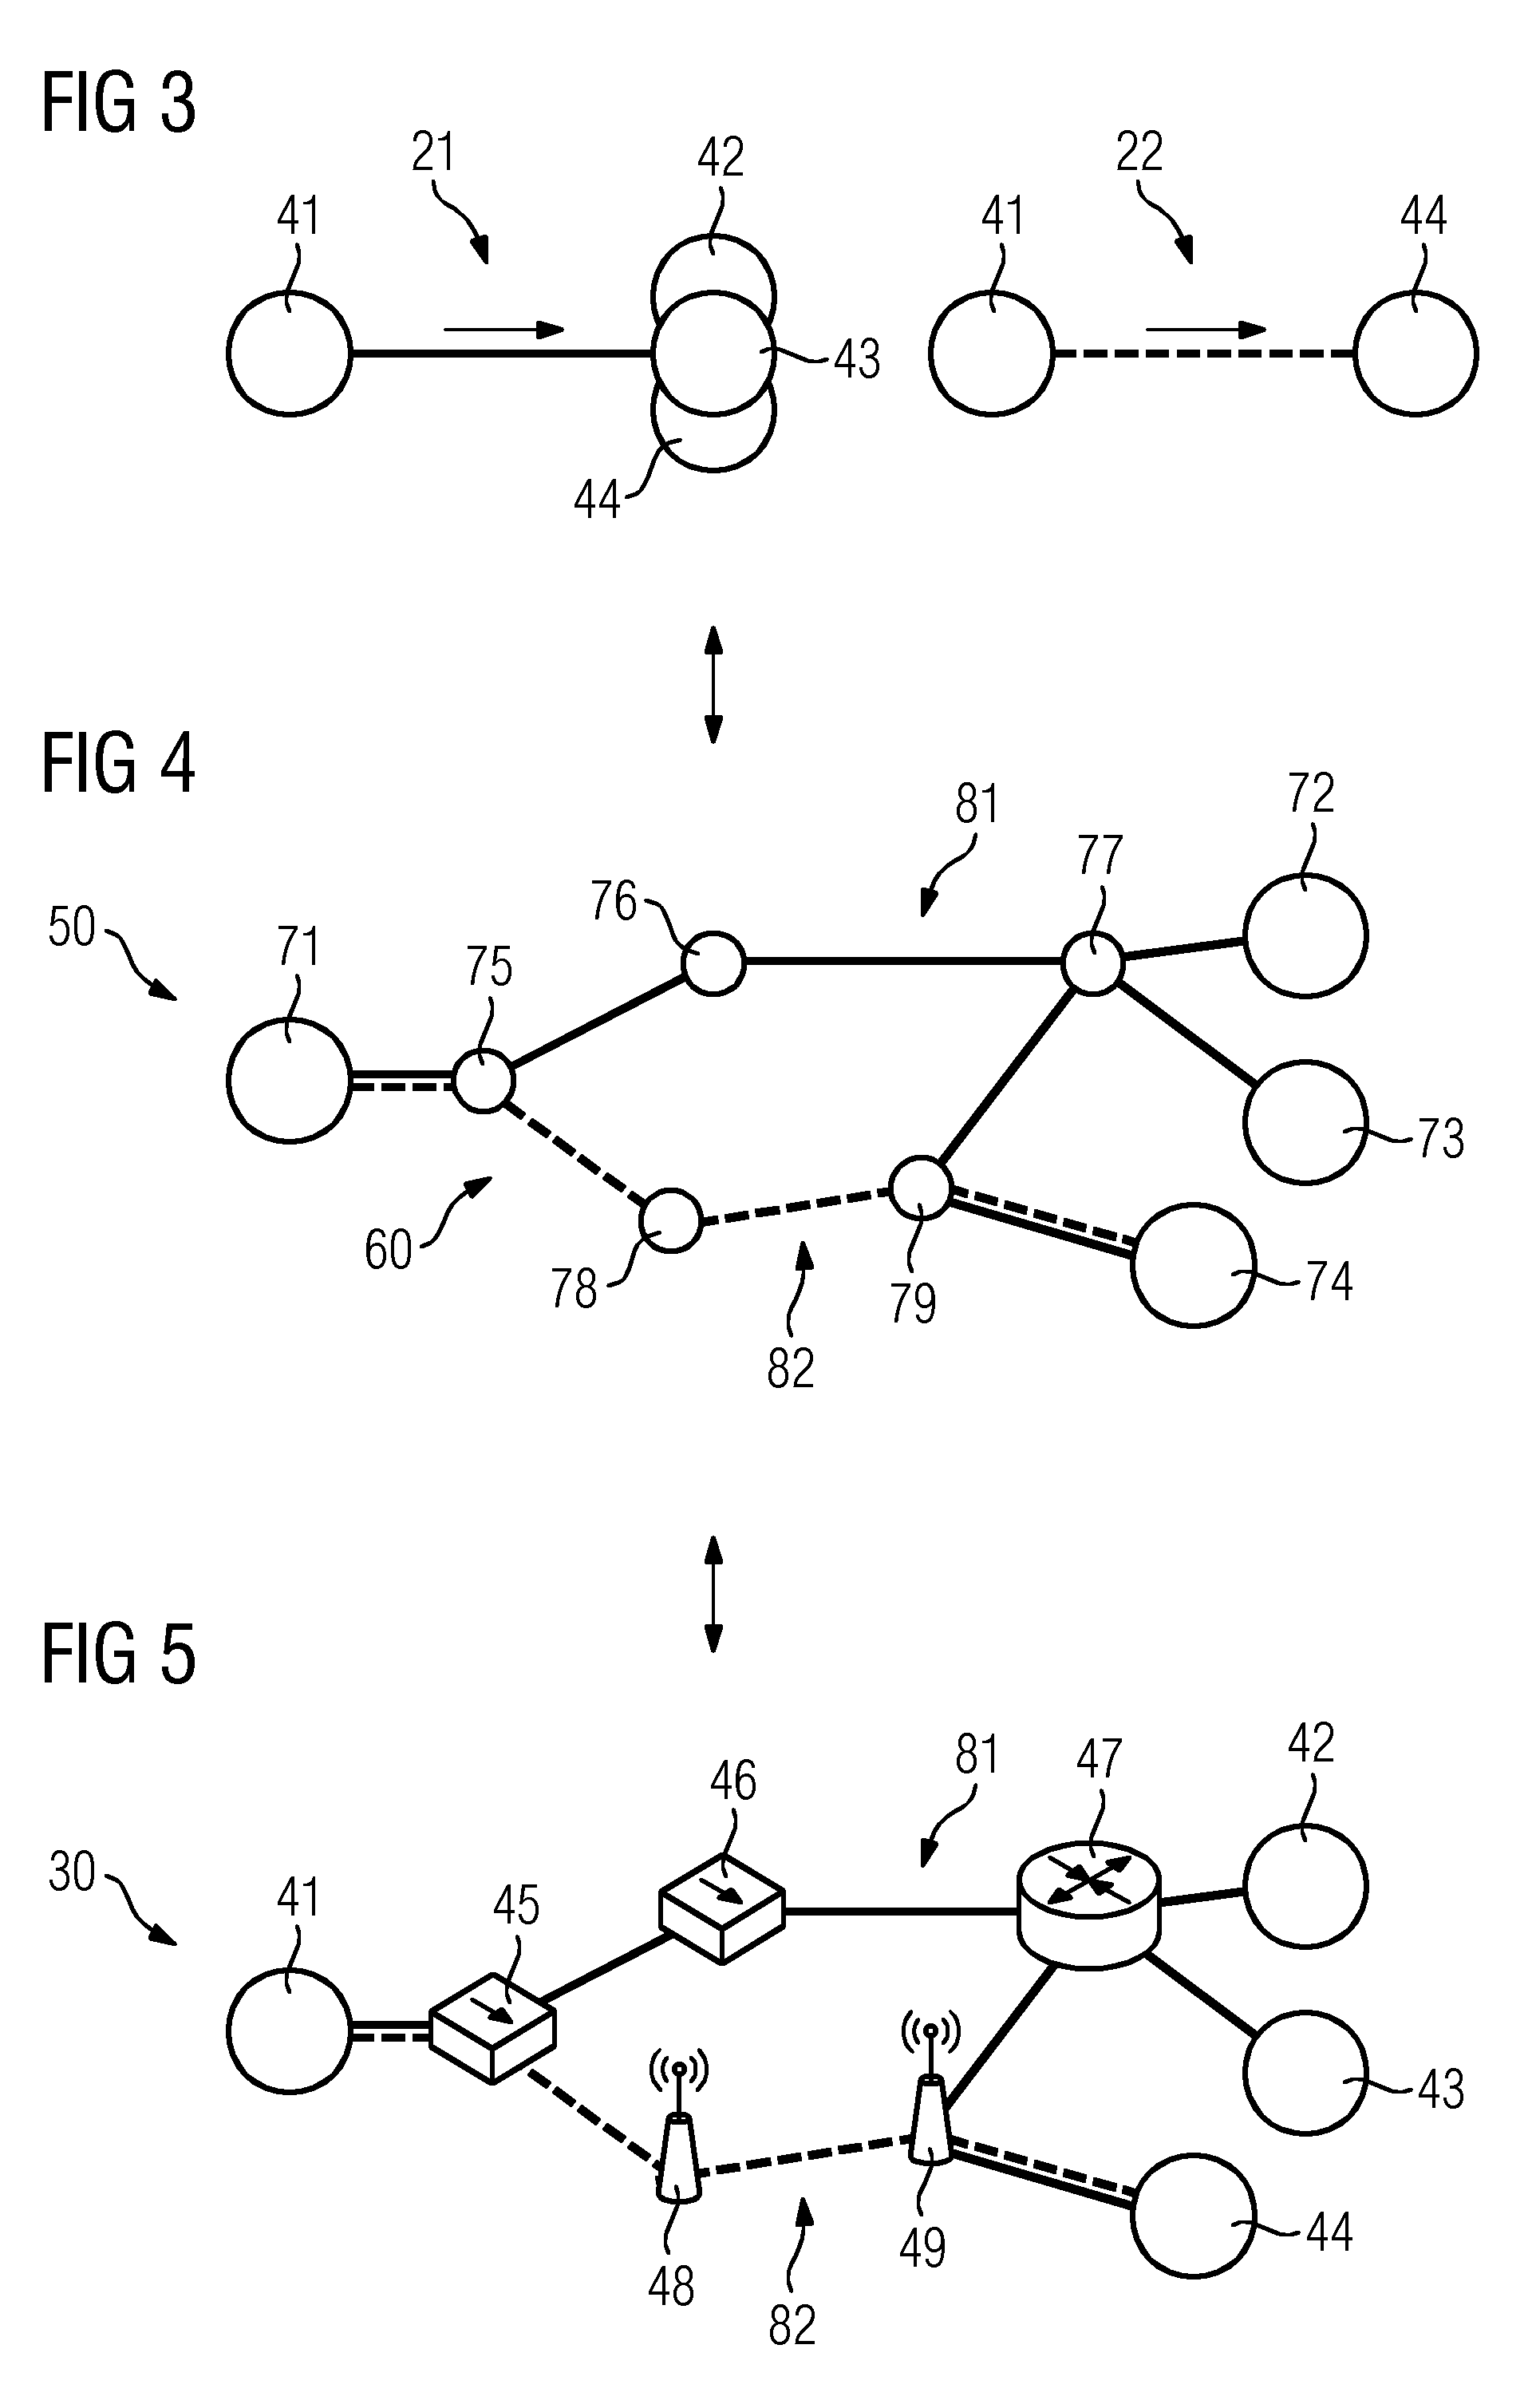 Controller and Method for Controlling Communication Services for Applications on a Physical Network